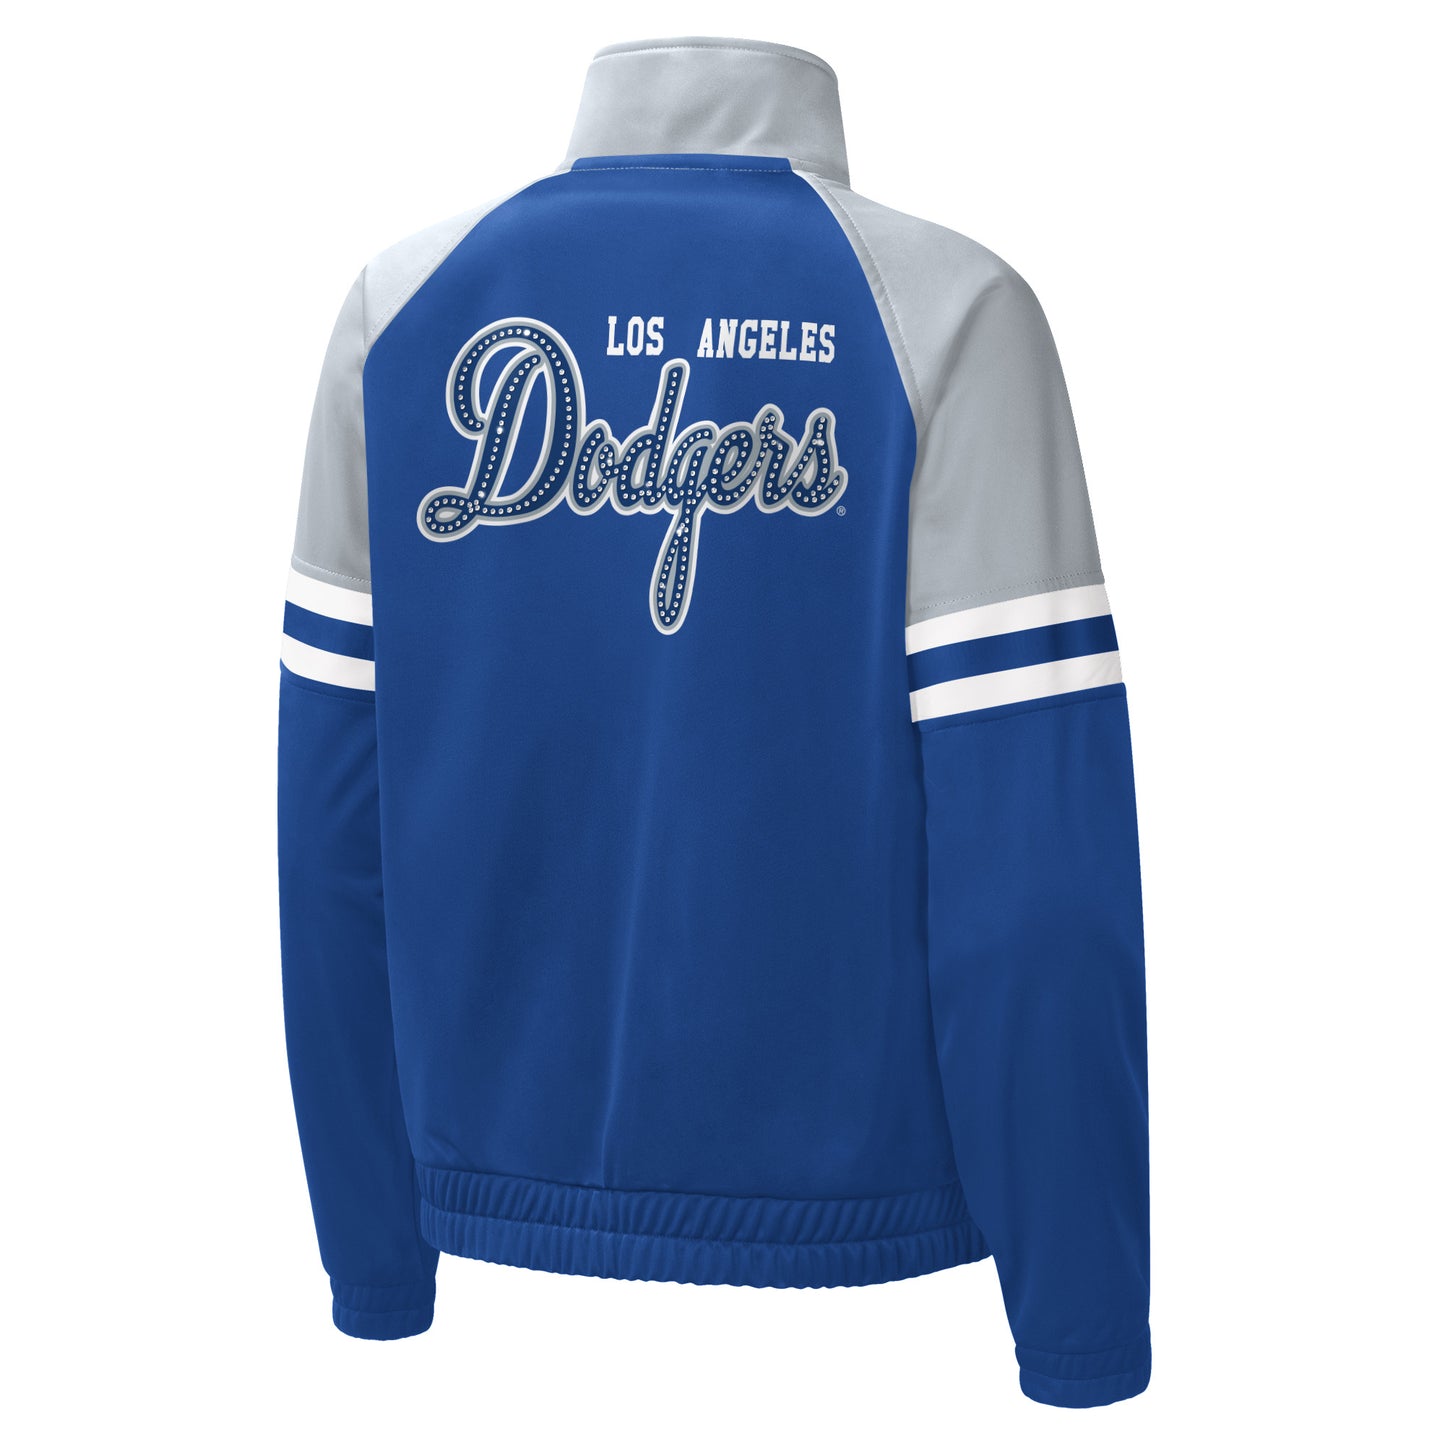 LOS ANGELES DODGERS WOMEN'S FIRST PLACE ZIP UP JACKET